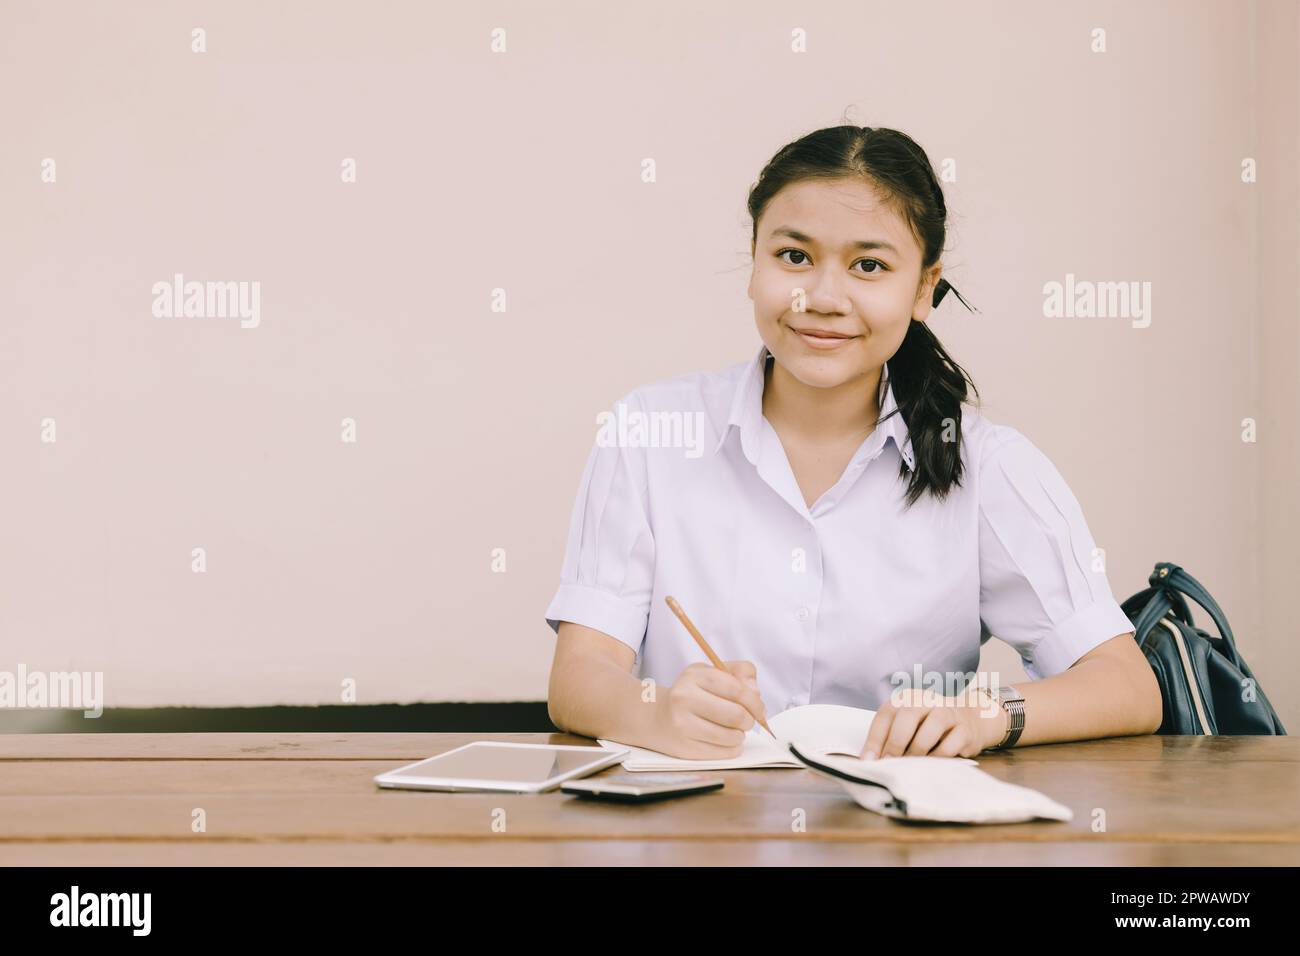 portrait southeast asian young teen student sitting education learning in school uniform with copy space. Stock Photo